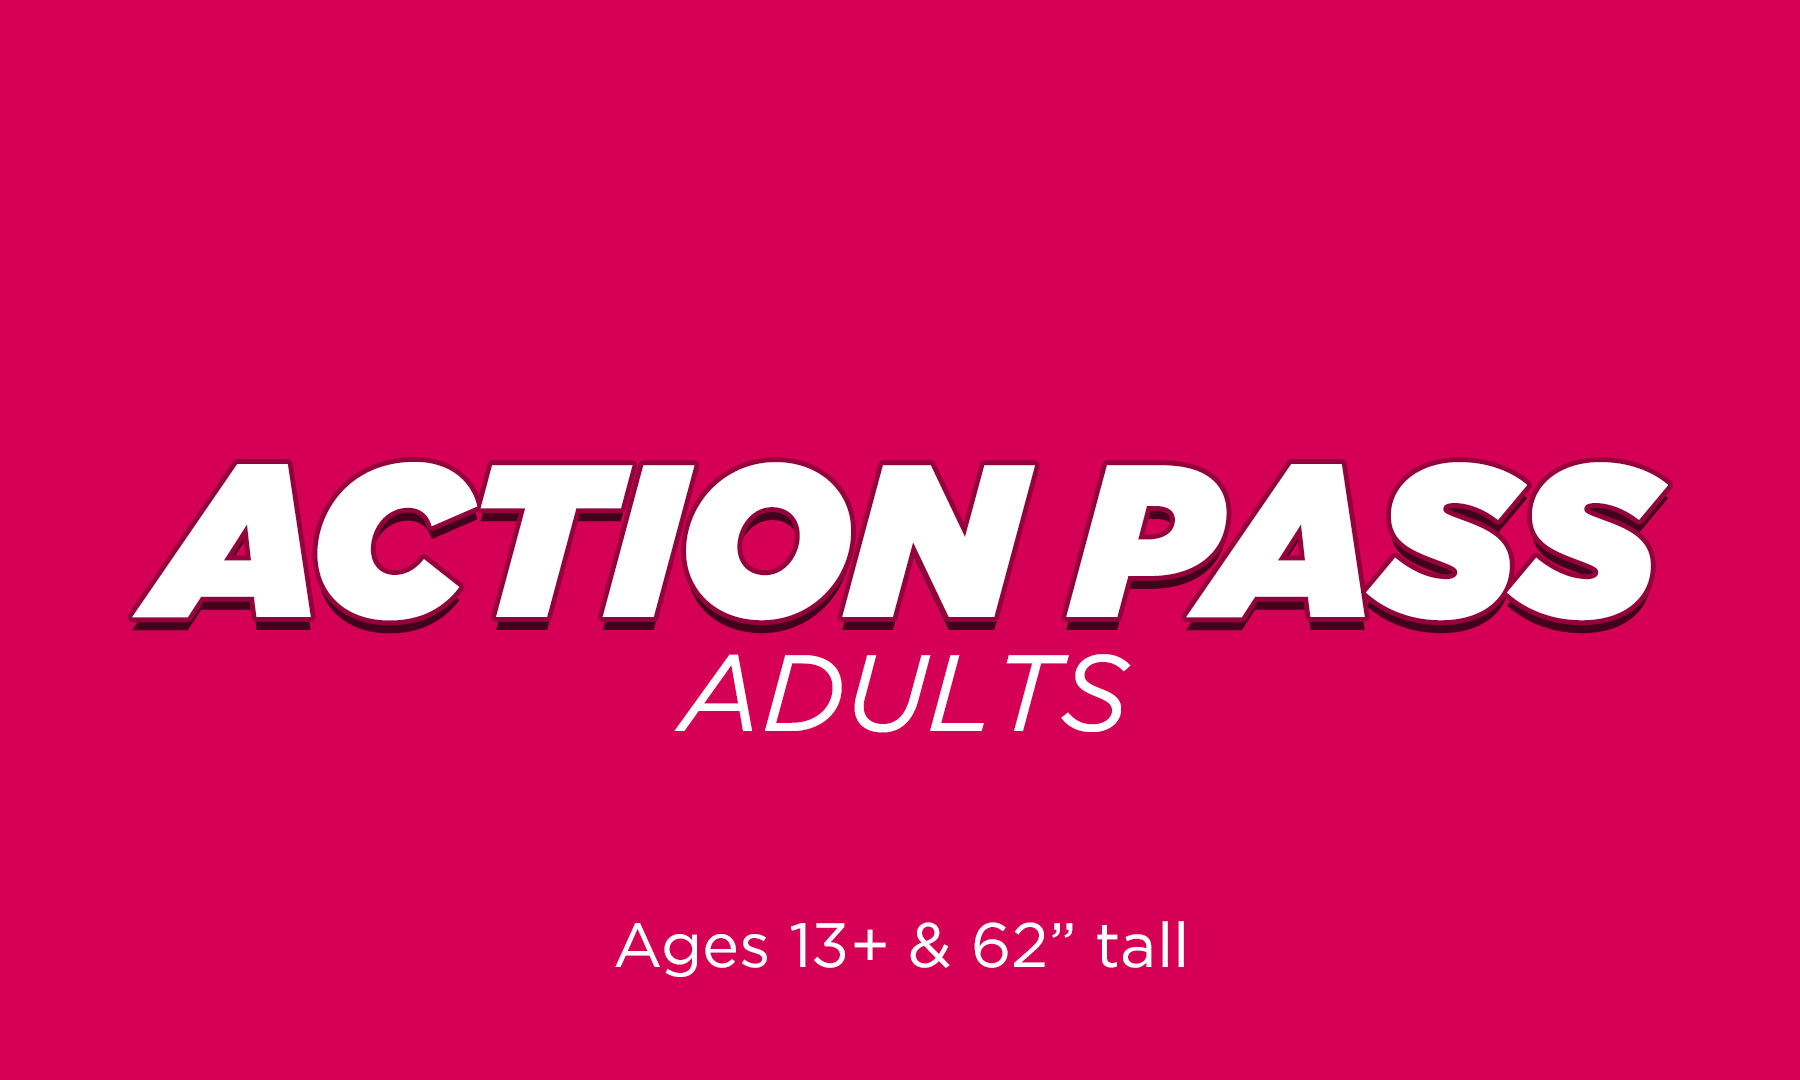 Action Pass is only available in house